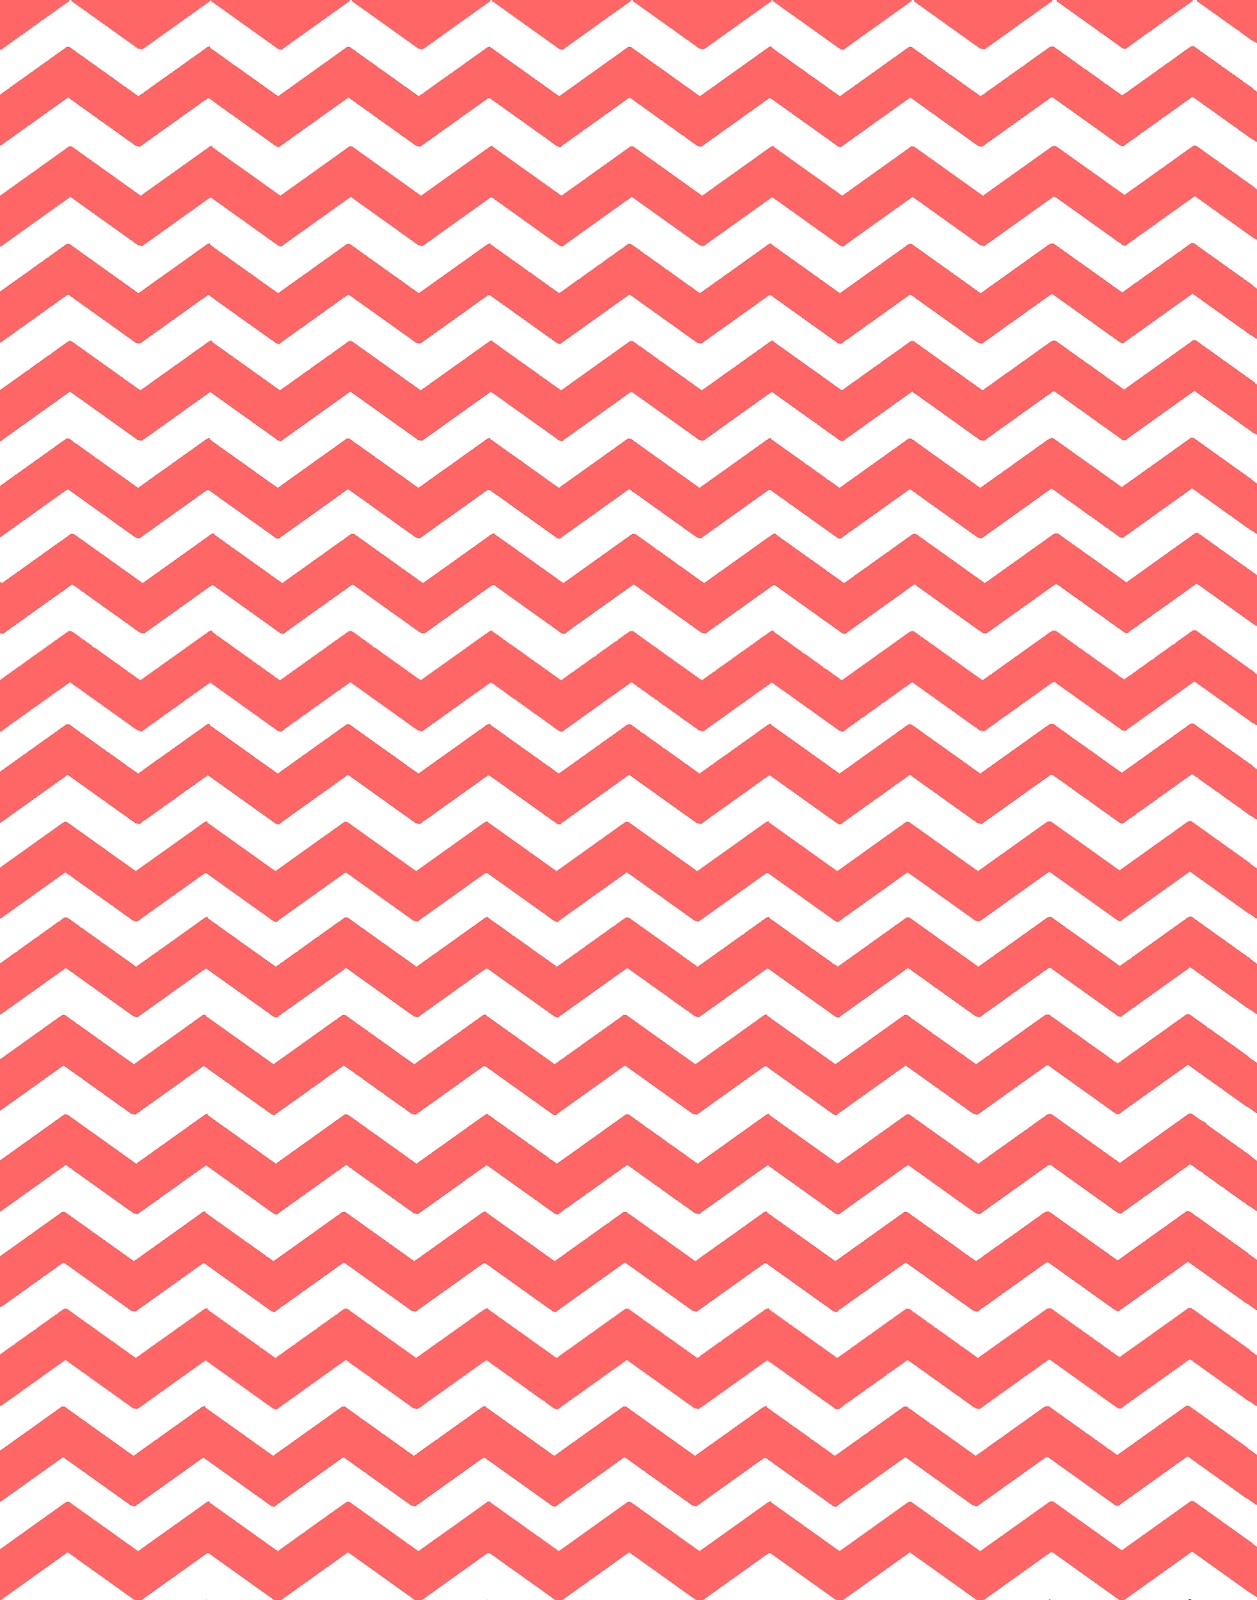 New Colors Chevron Background Patterns